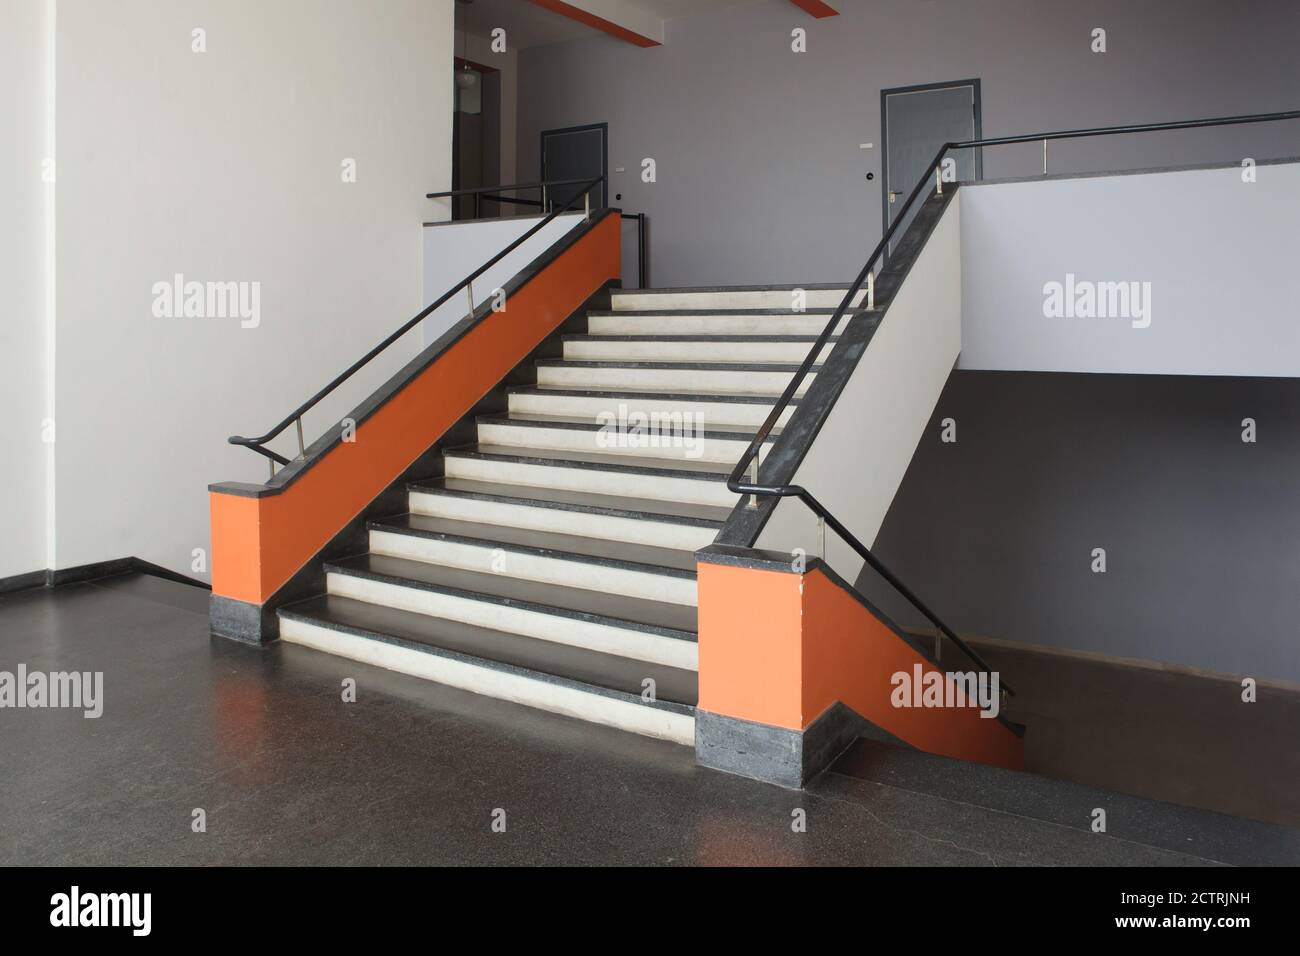 Staircase of the north wing of the Bauhaus Building designed by German modernist architect Walter Gropius (1925-1926) in Dessau in Saxony-Anhalt, Germany. Stock Photo